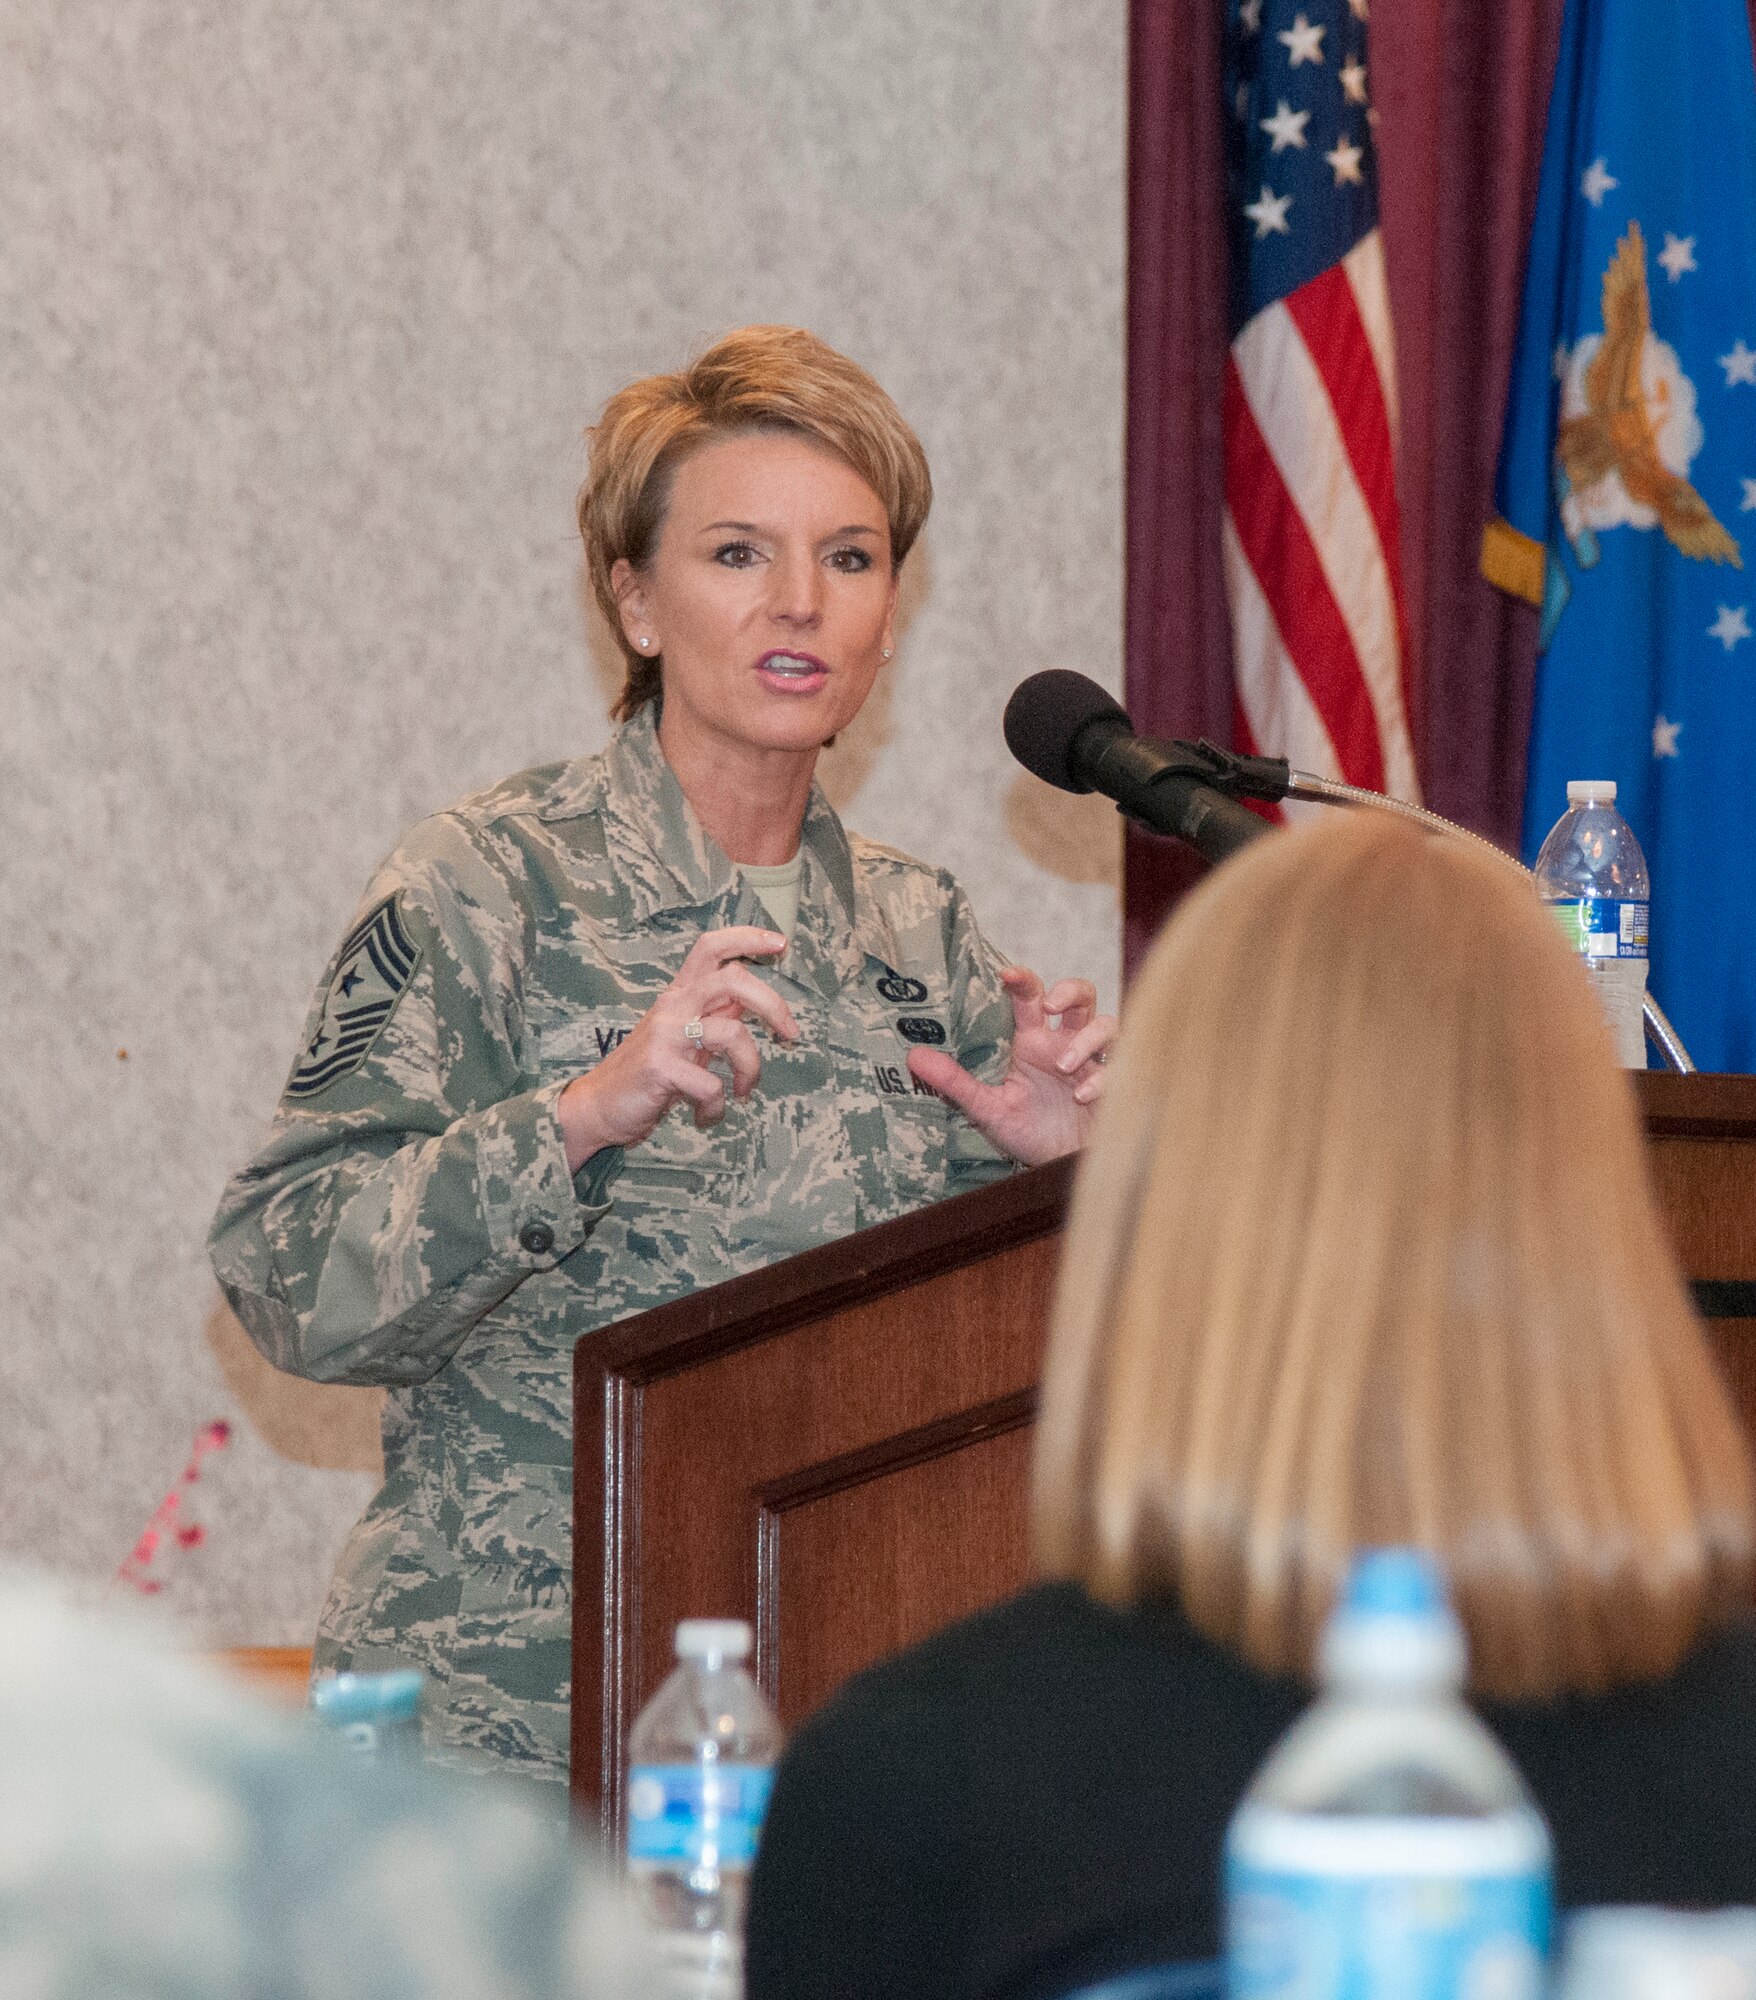 Chief Master Sgt. Gay Veale, 11th Air Force command chief, speaks to Airmen attending the 20th Air Force Women’s Leadership Symposium in the F.E. Warren Air Force Base, Wyo., Trail’s End Event Center Sept. 16, 2015. The WLS was one of the ICBM Center for Excellence’s projects that drew scores of female Airmen to be mentored by leaders throughout the Air Force and share ideas about bettering the military experience for female Airmen. (U.S. Air Force photo by Senior Airman Jason Wiese)